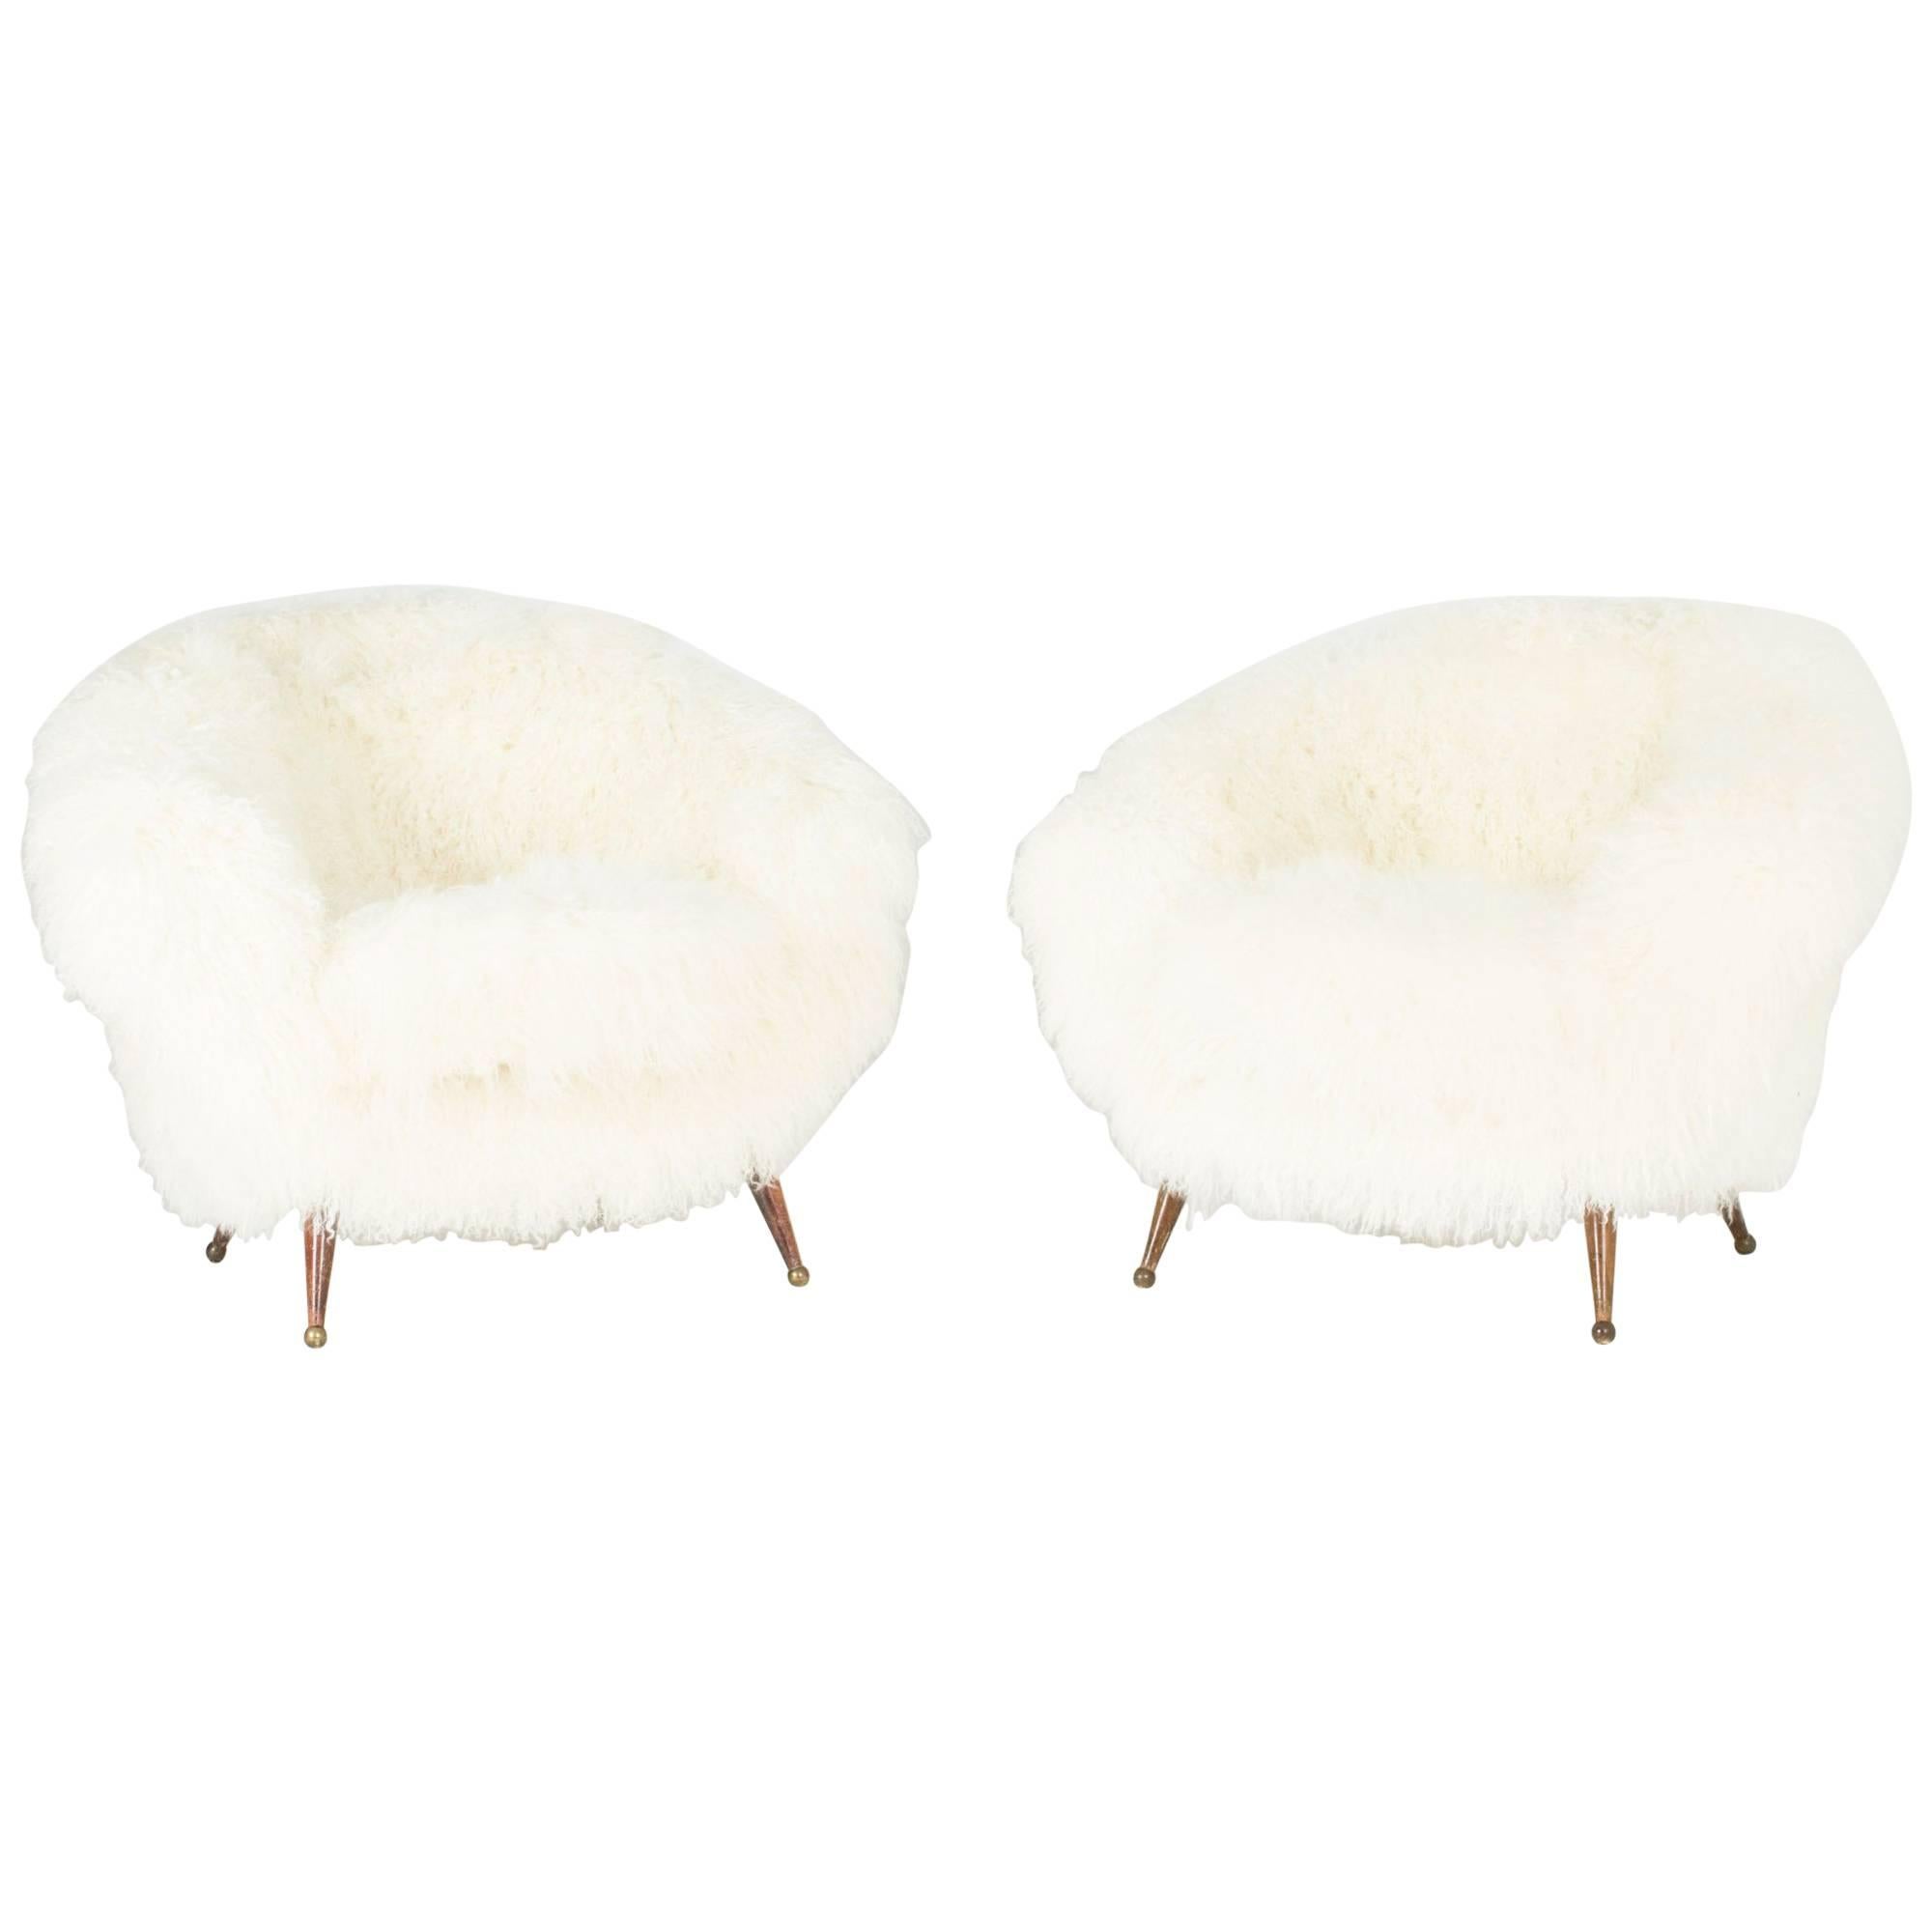 Pair of "Tellus" Lounge Chairs by Folke Jansson